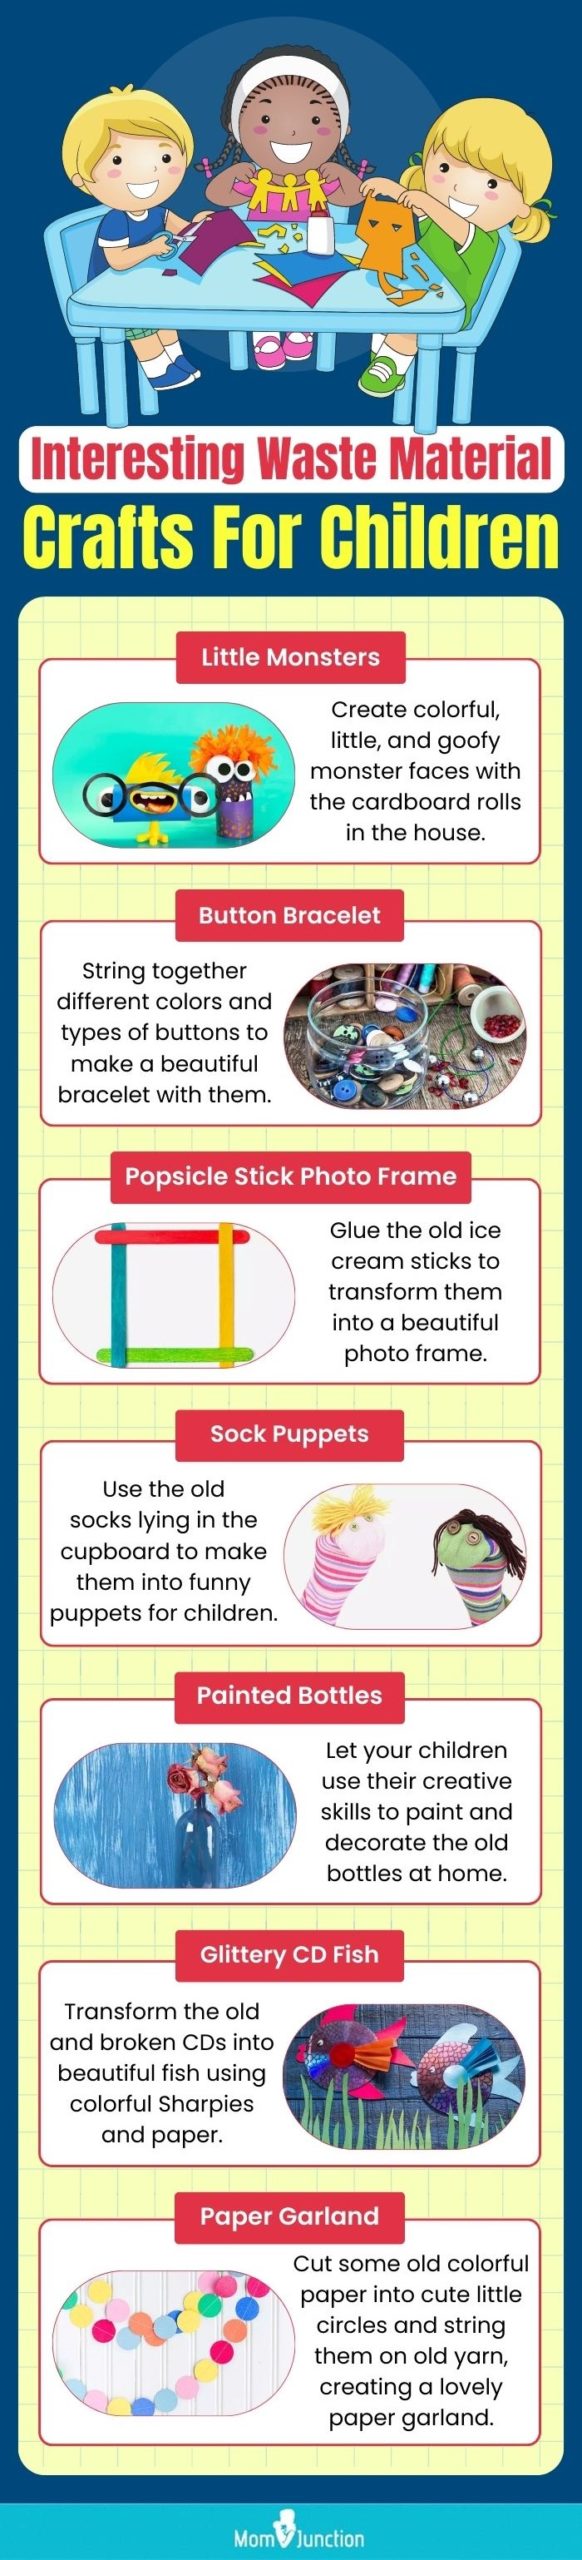 interesting waste material crafts for children (infographic)